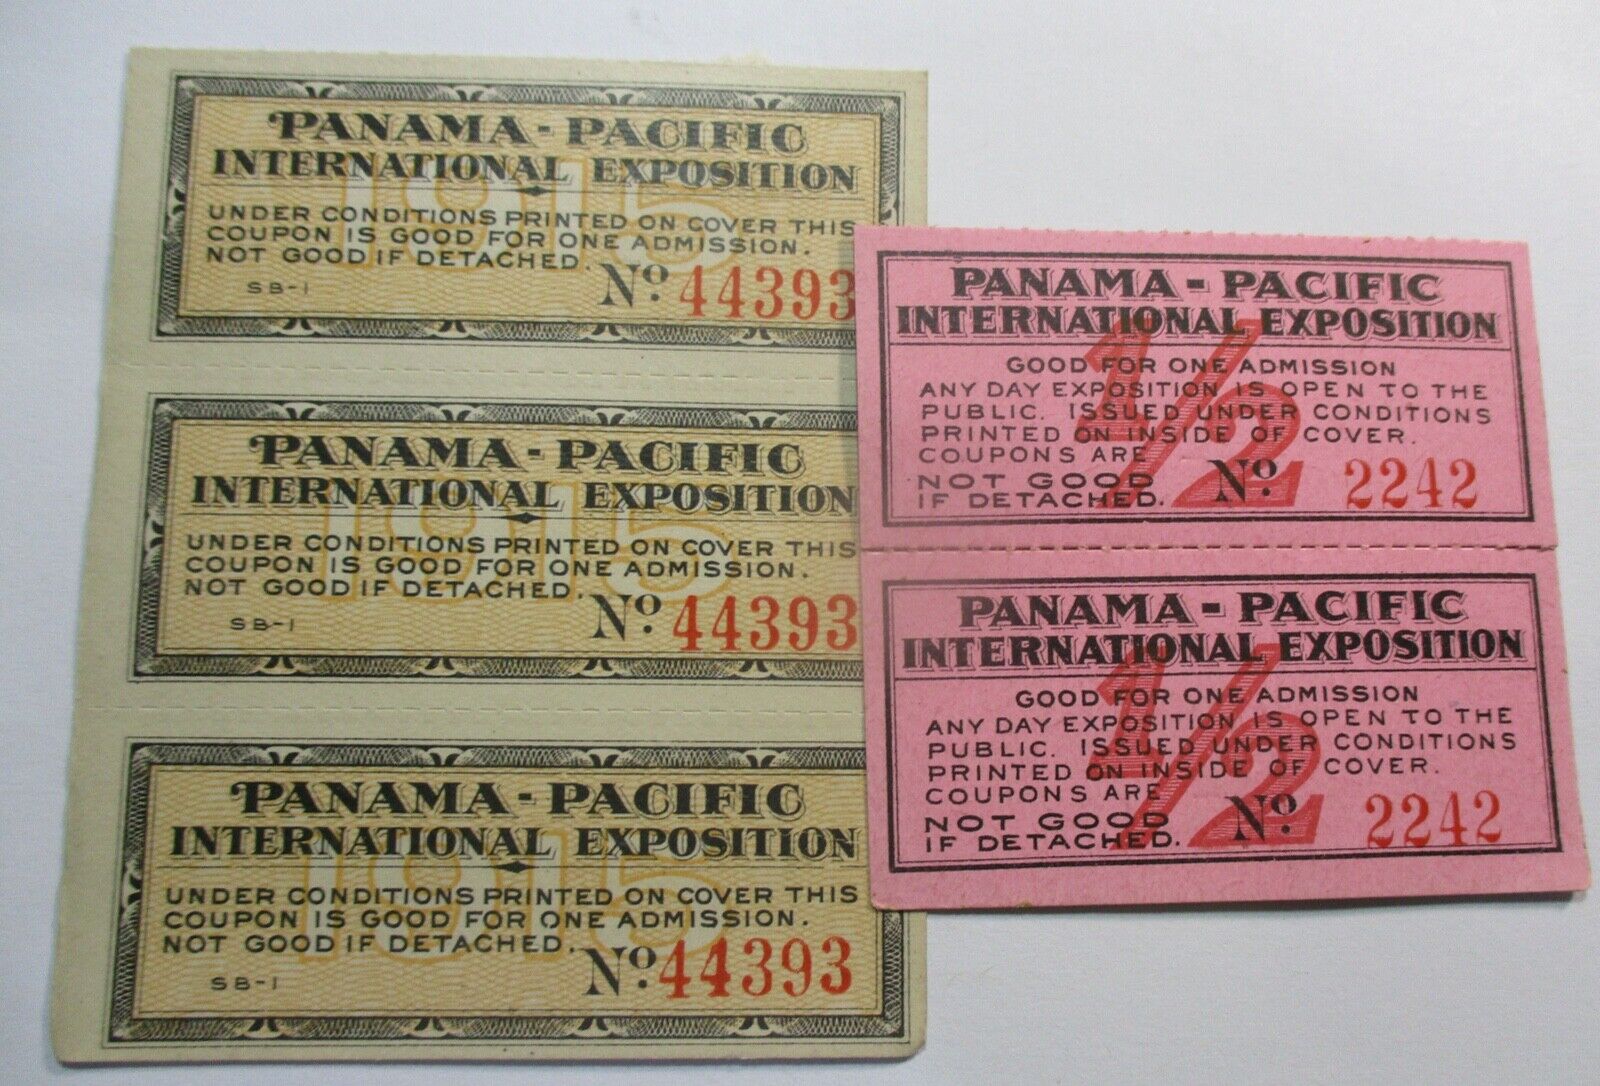 ADULT & HALF-PRICE CHILD TICKETS FOR THE 1915 PANAMA PACIFIC PPIE EXPO SAN FRAN